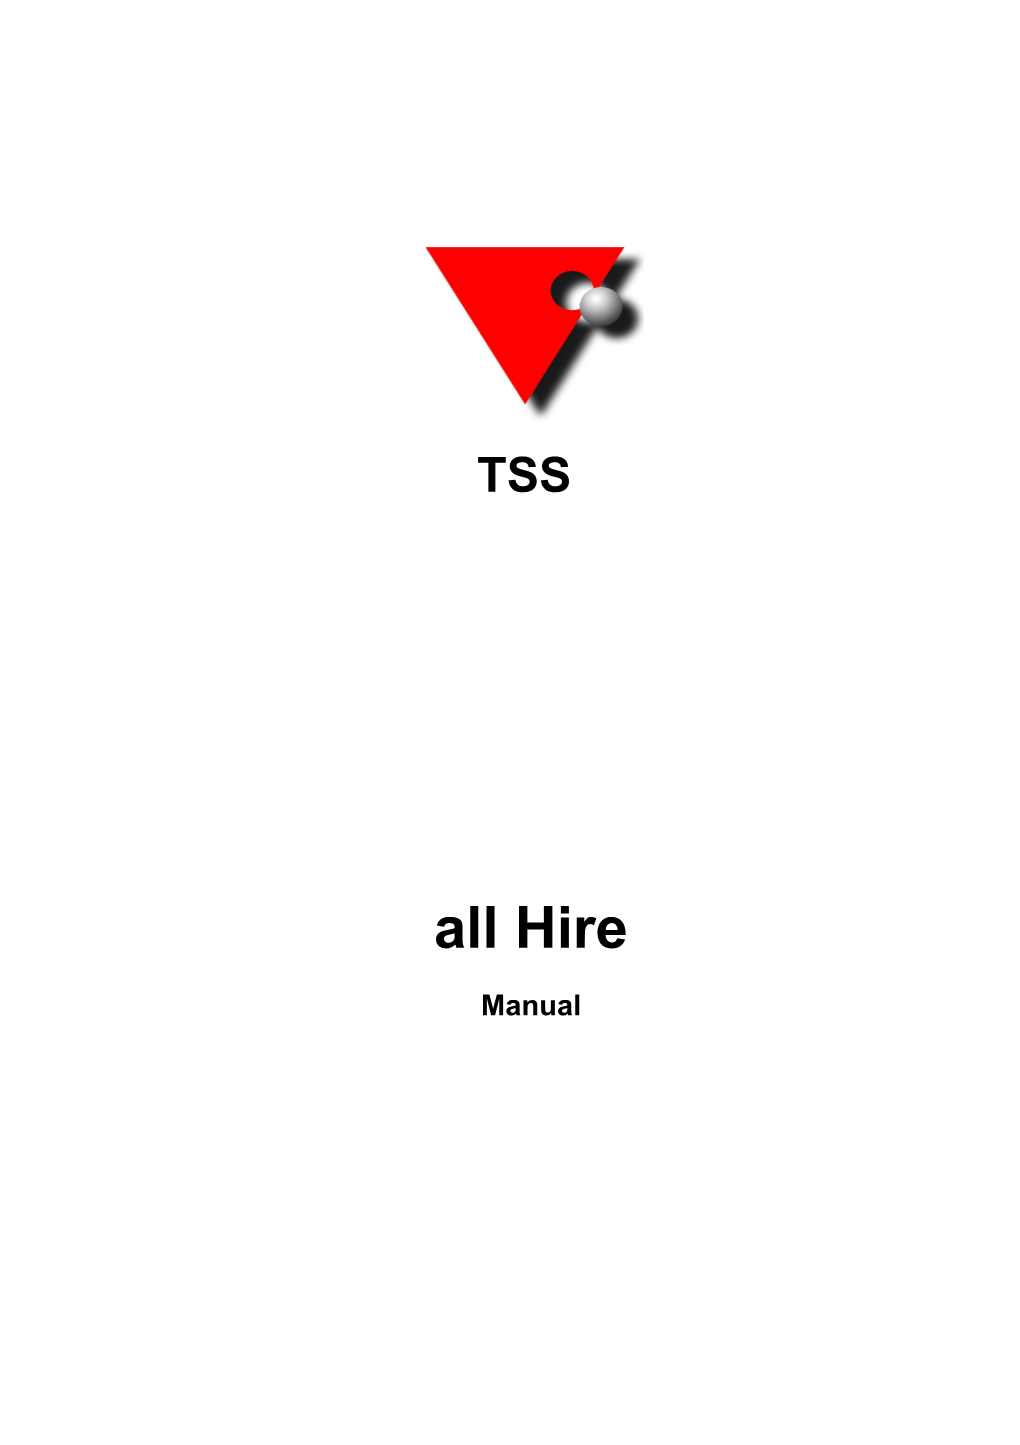 All Hire Manual